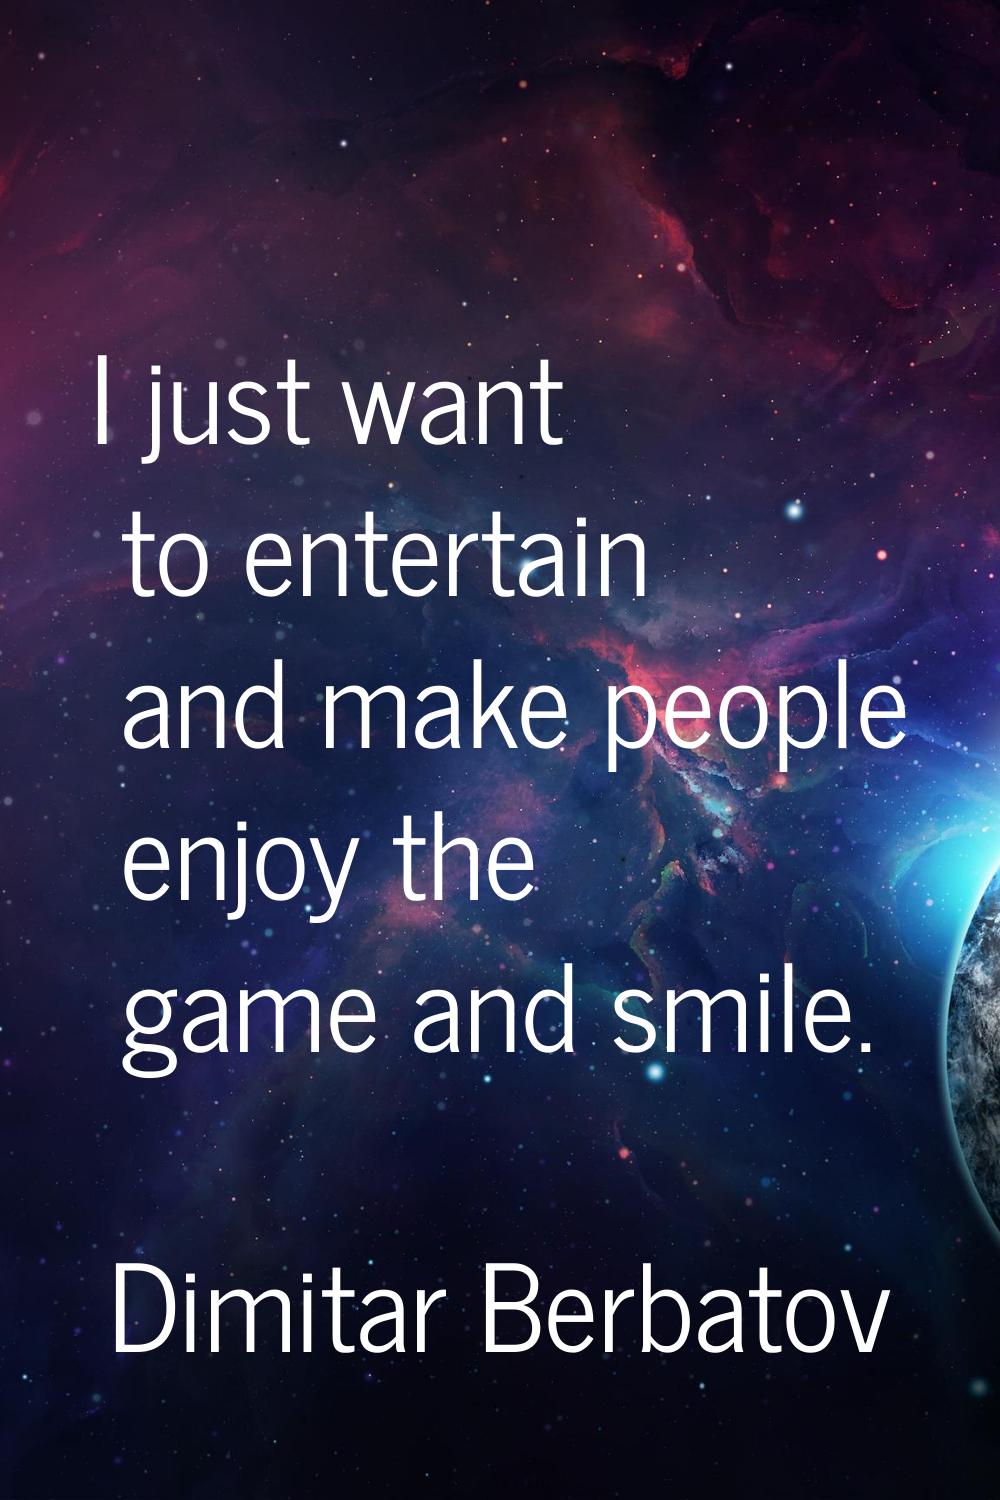 I just want to entertain and make people enjoy the game and smile.